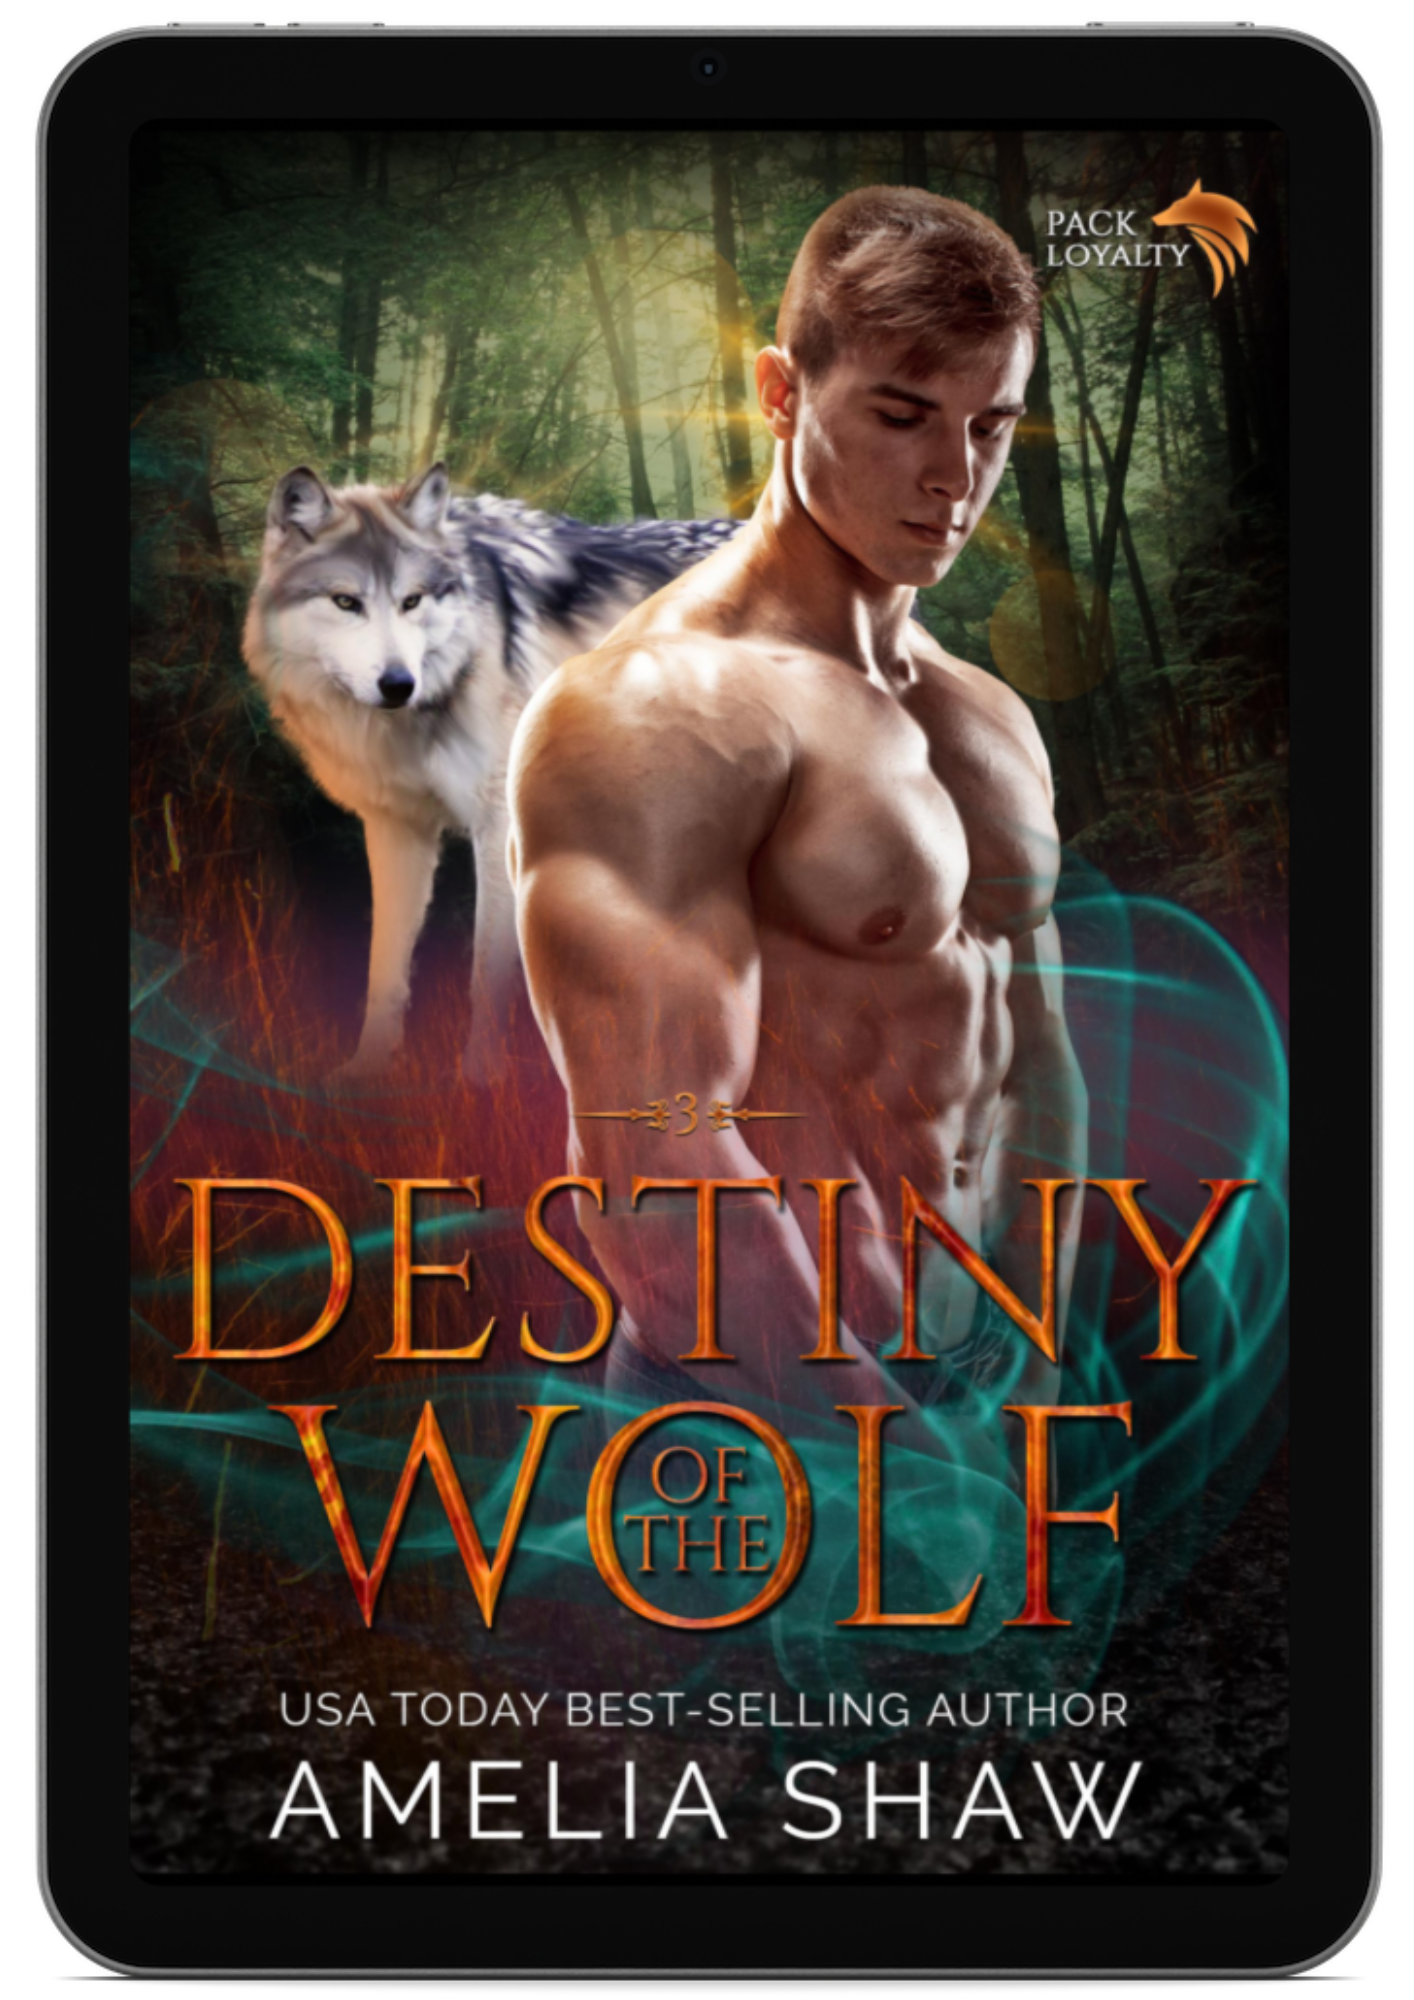 Destiny of the Wolf | Book 3 - Pack Loyalty